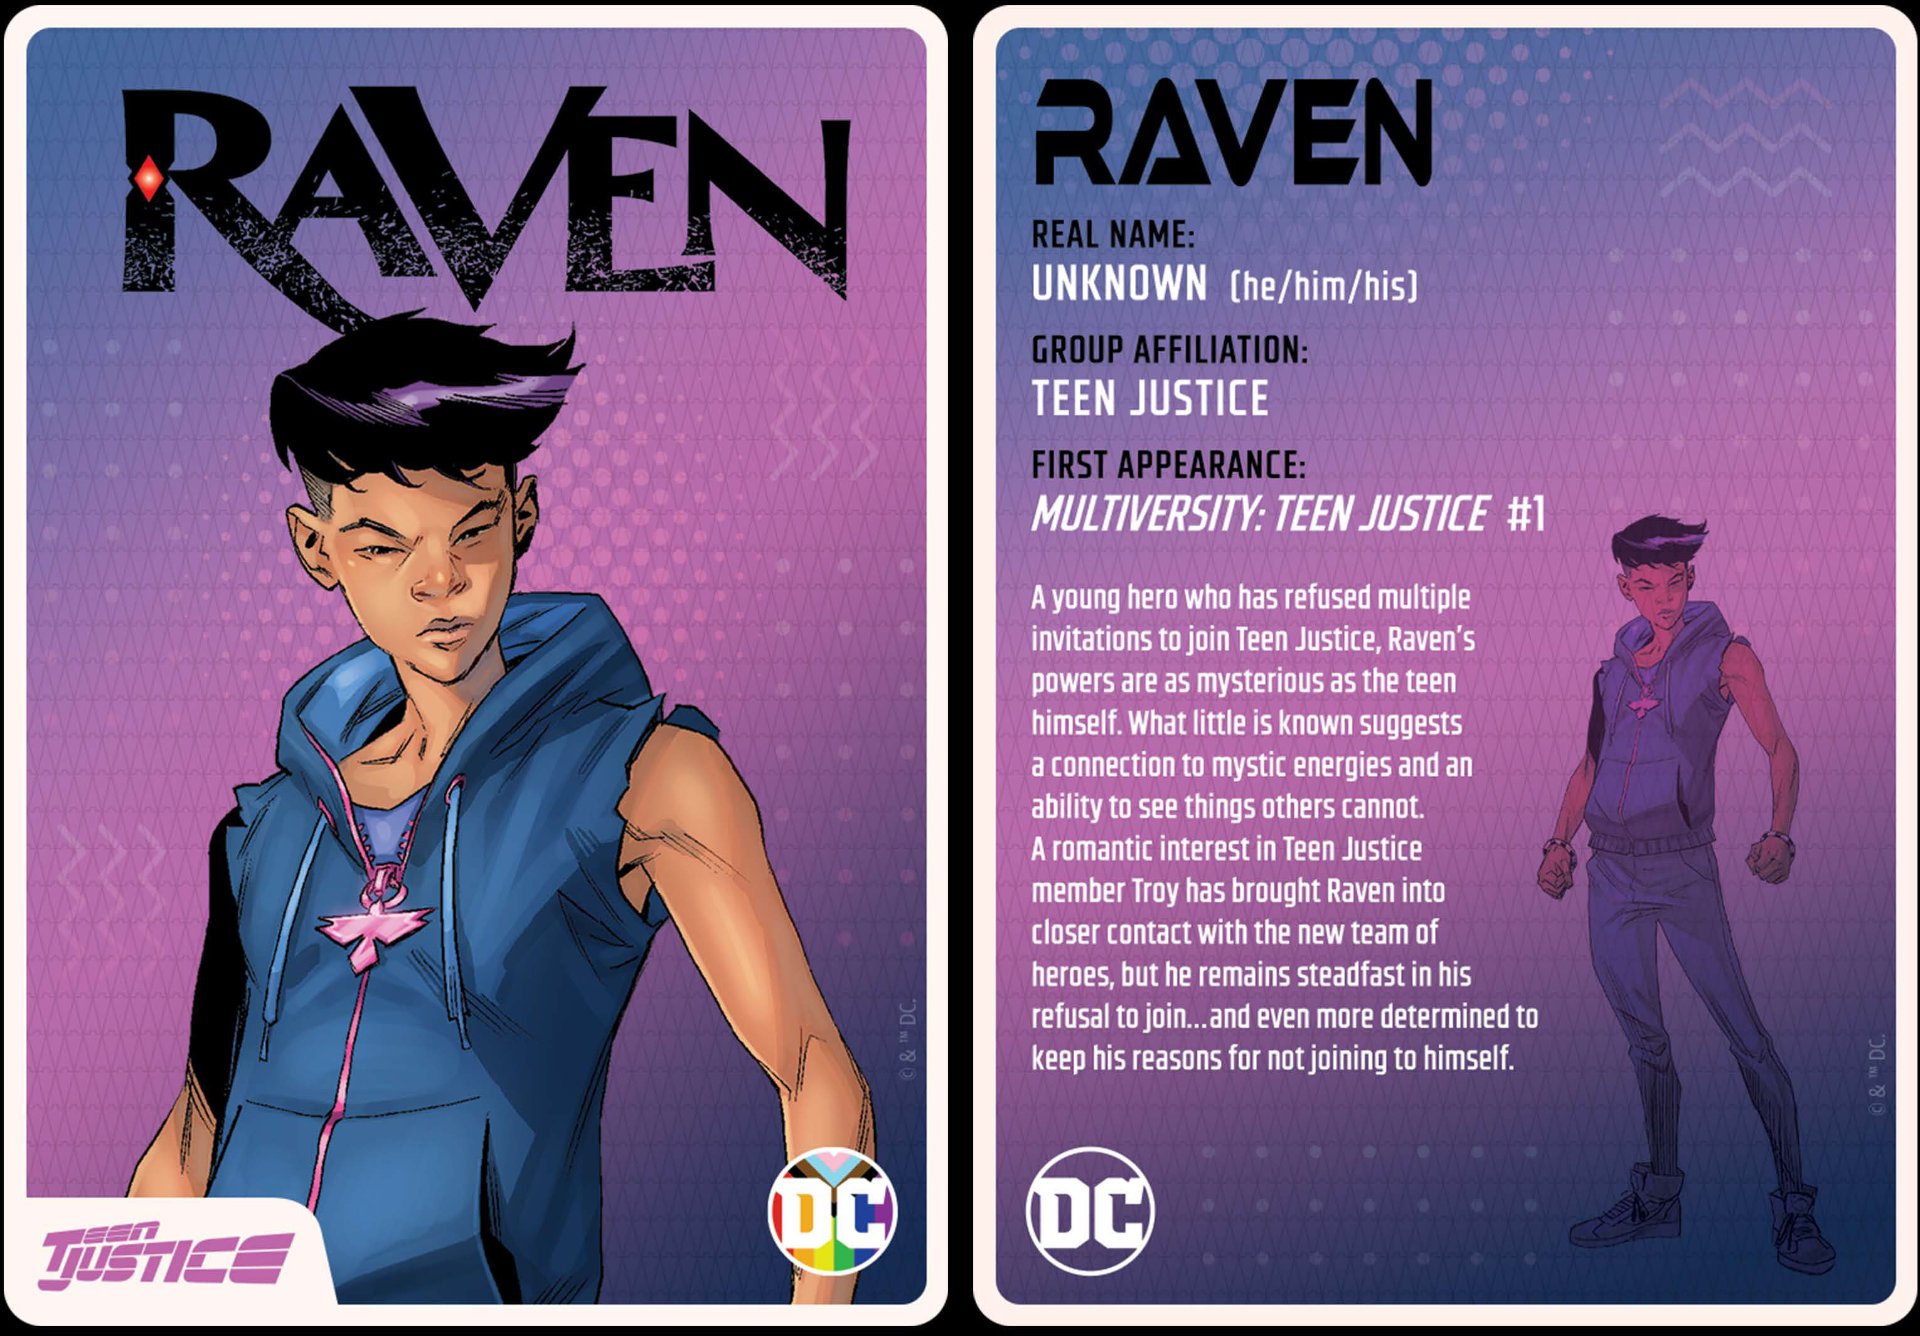 Raven (real name unknown) - He/She/He from Multiversity: Teen Justice